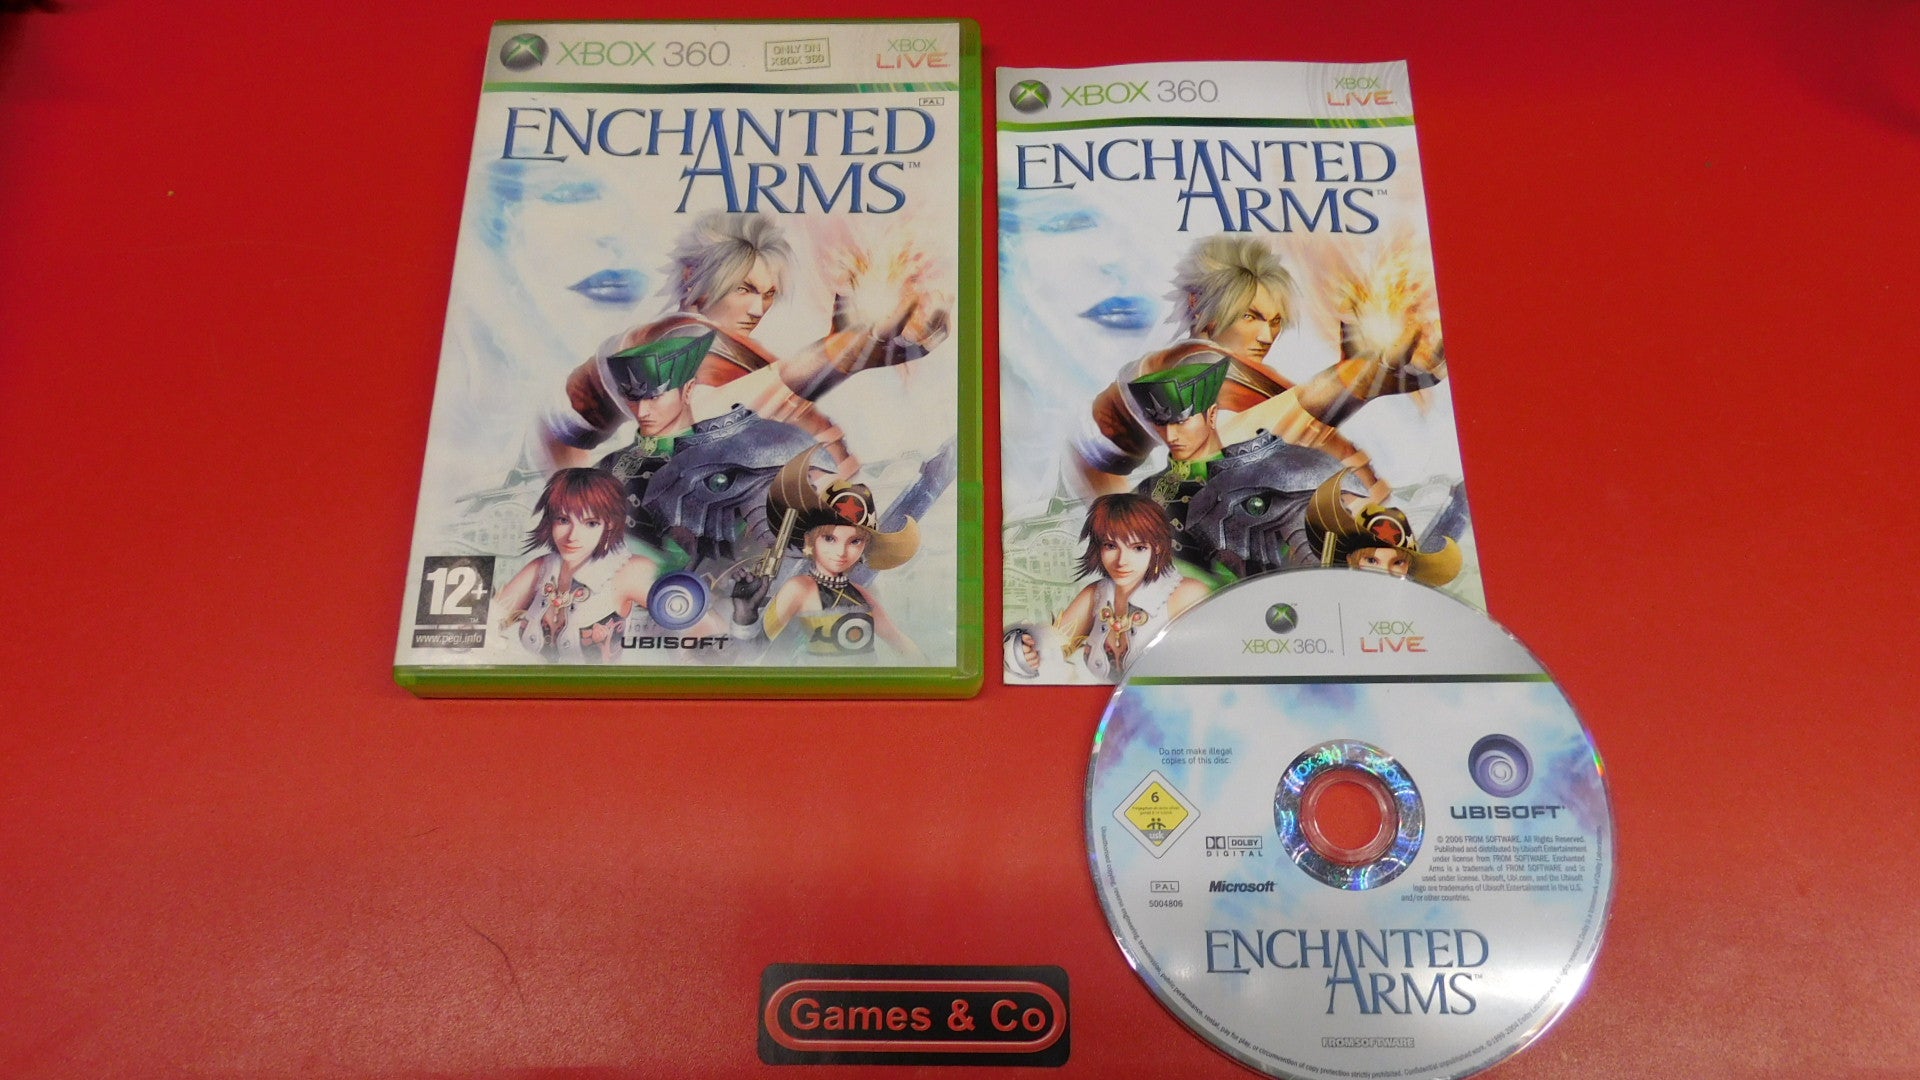 ENCHANTED ARMS